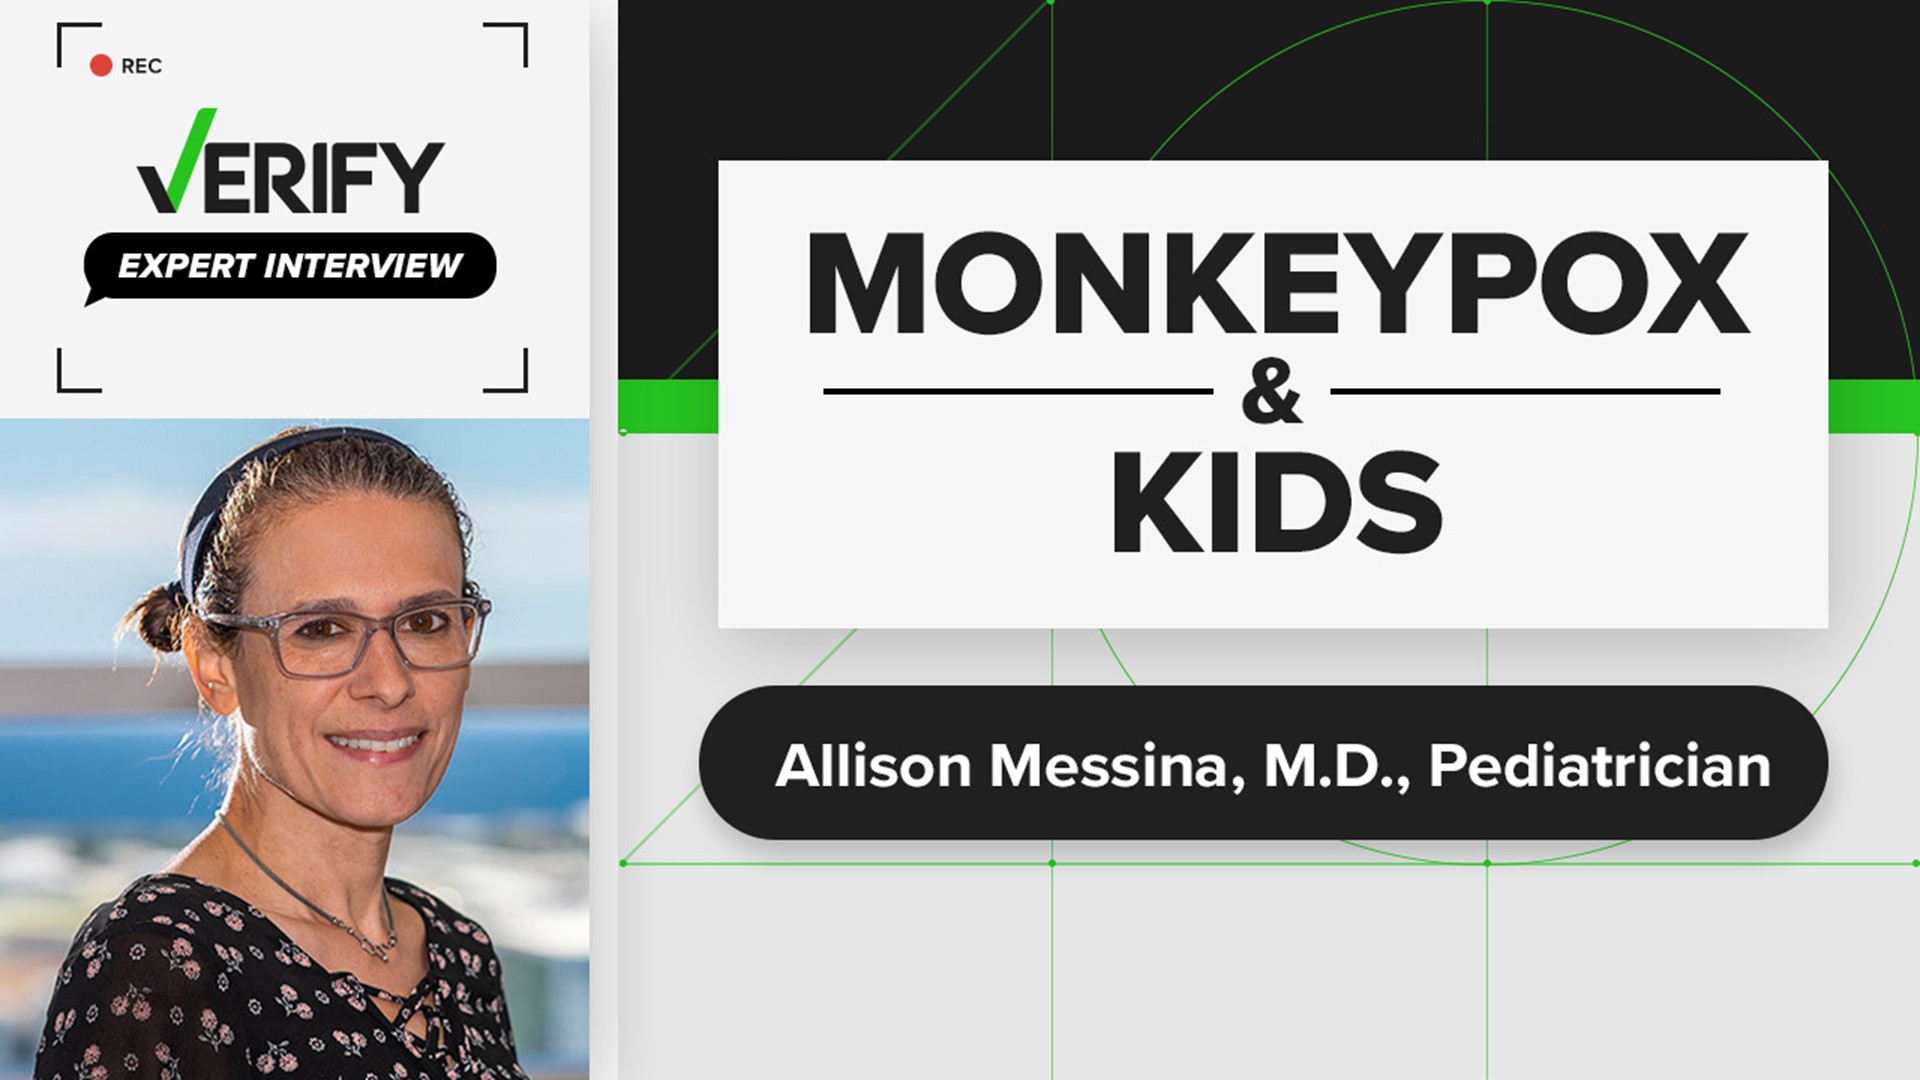 People have questions about how monkeypox affects kids. Pediatric infectious disease specialist, Allison Messina, M.D., speaks on the topic.